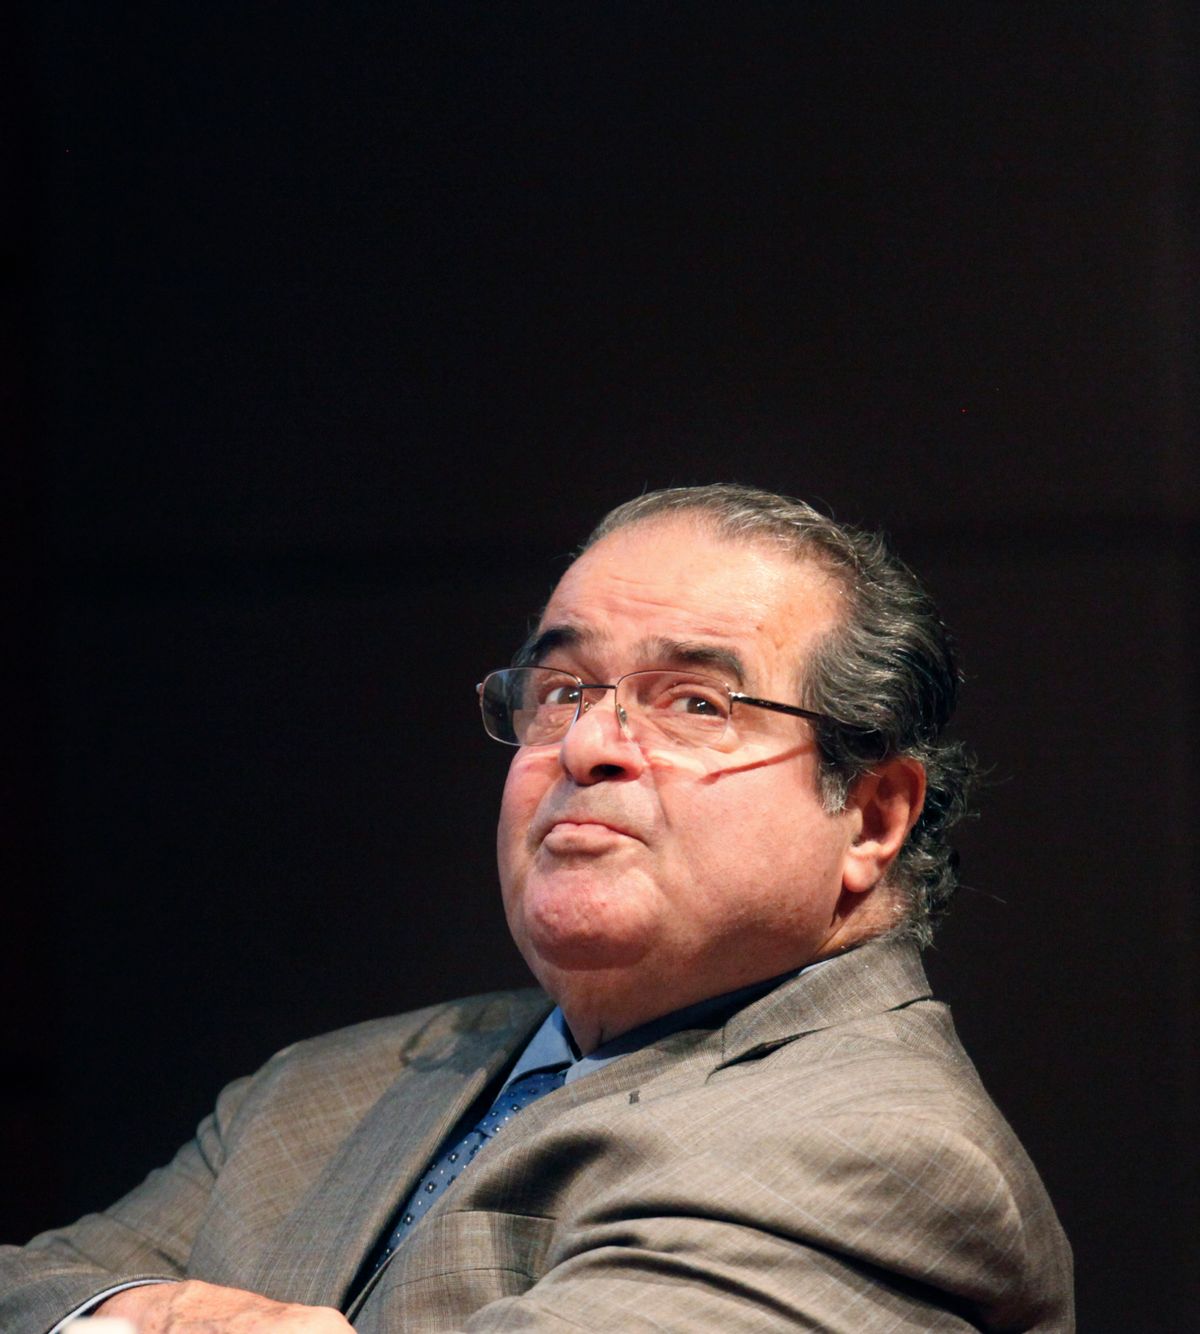 FILE - In this Oct. 18, 2011 file photo, U.S. Supreme Court justice Antonin Scalia looks into the balcony before addressing the Chicago-Kent College Law justice in Chicago. A letter from the Supreme Court's doctor says Scalia suffered from coronary artery disease, obesity and diabetes, among other ailments that probably contributed to the justice's sudden death. (AP Photo/Charles Rex Arbogast, File) (AP)